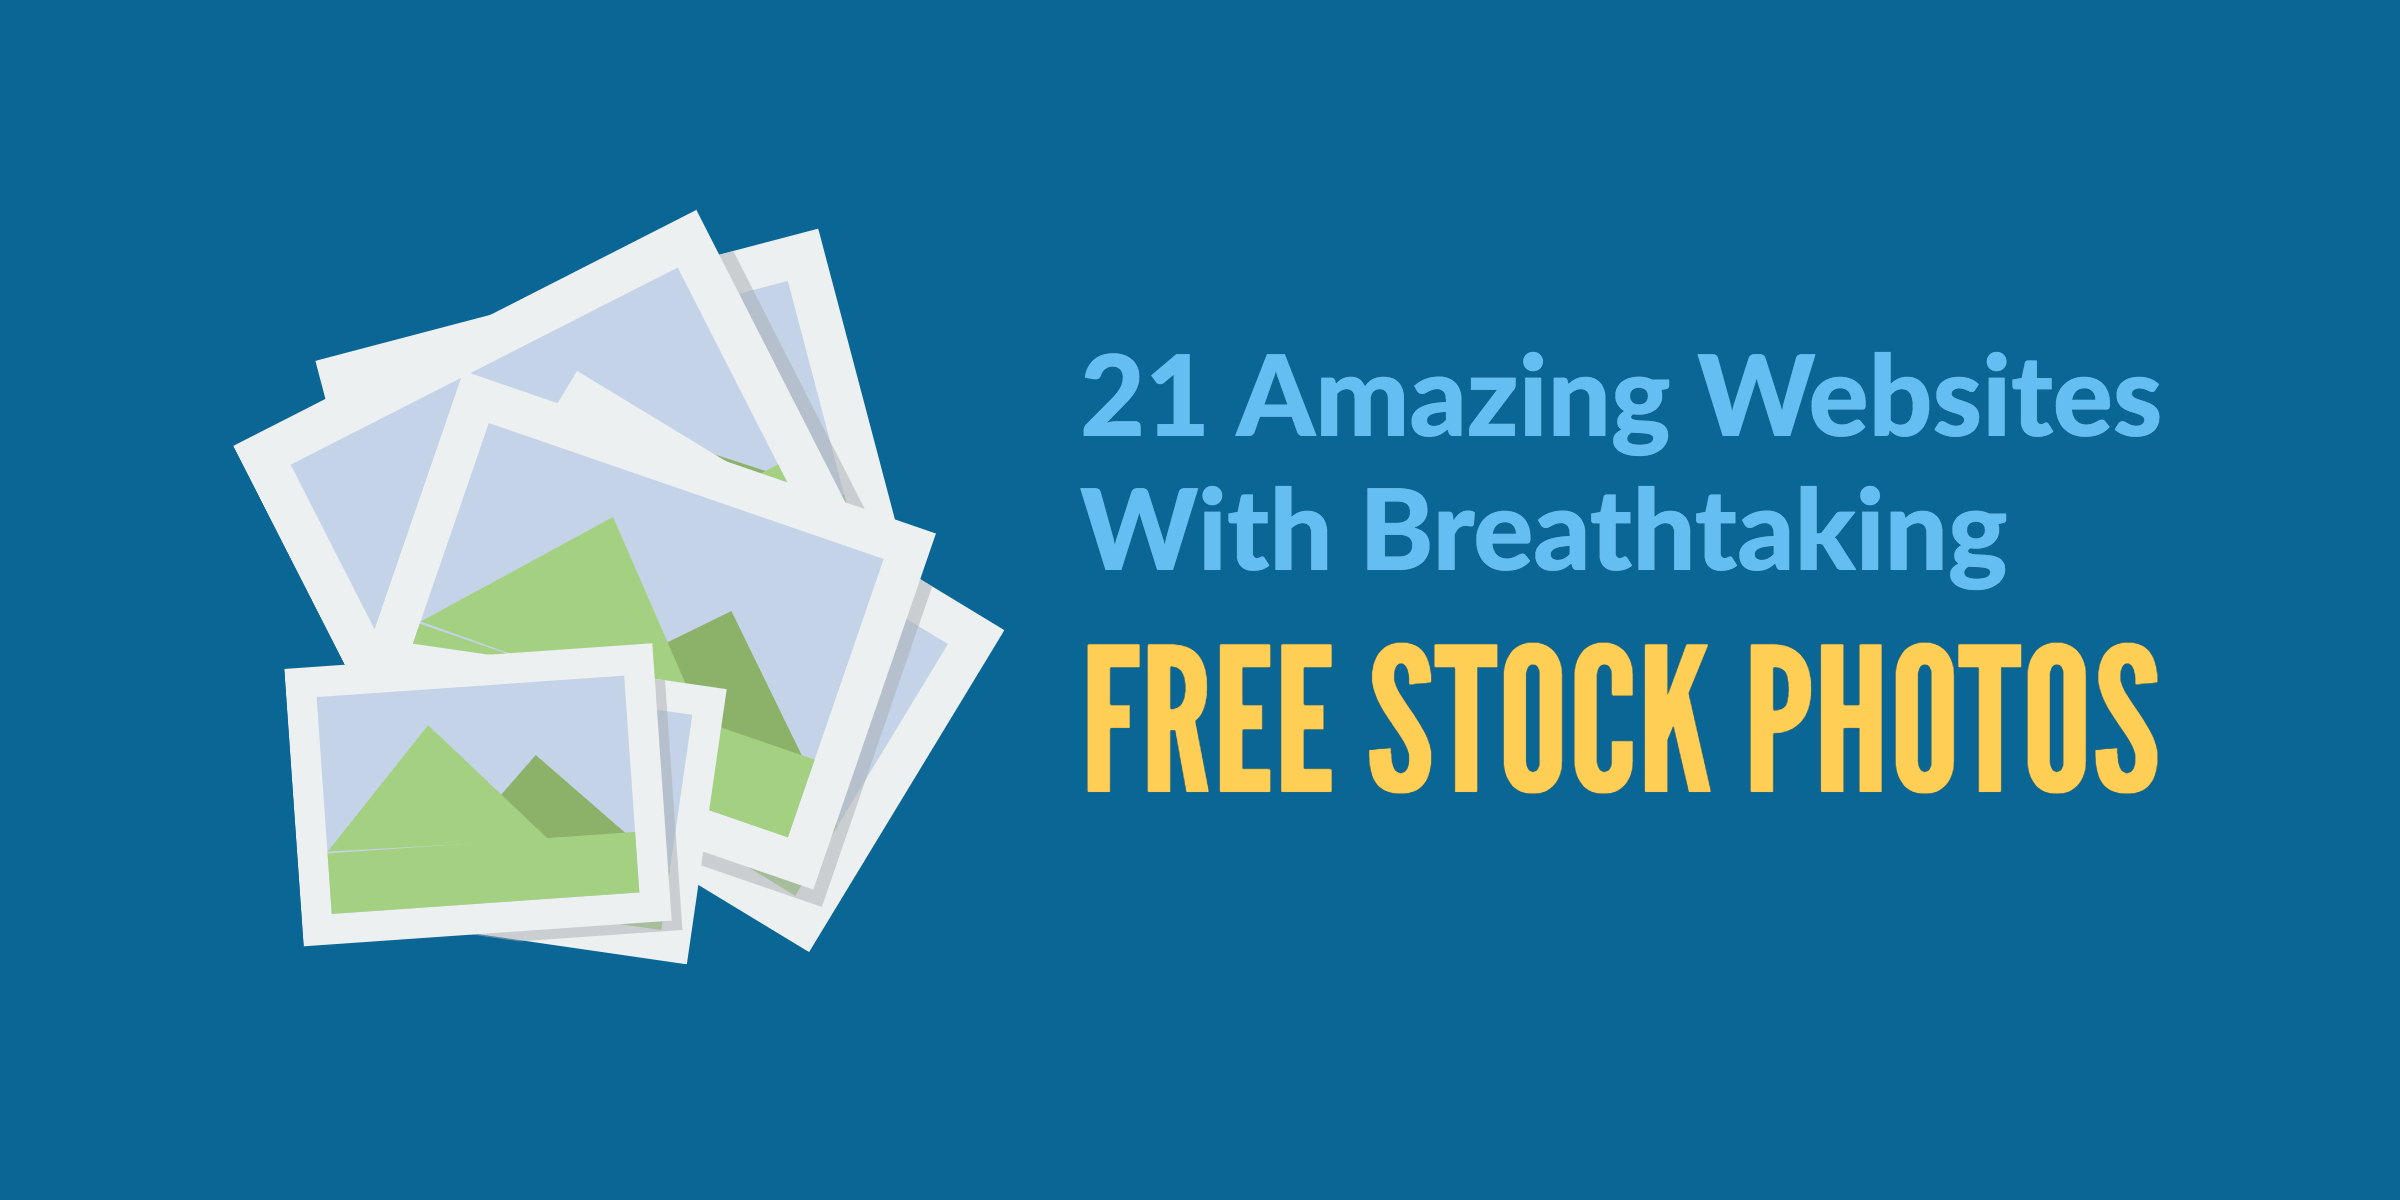 21 Amazing Sites With Breathtaking Free Stock Photos 2021 Update